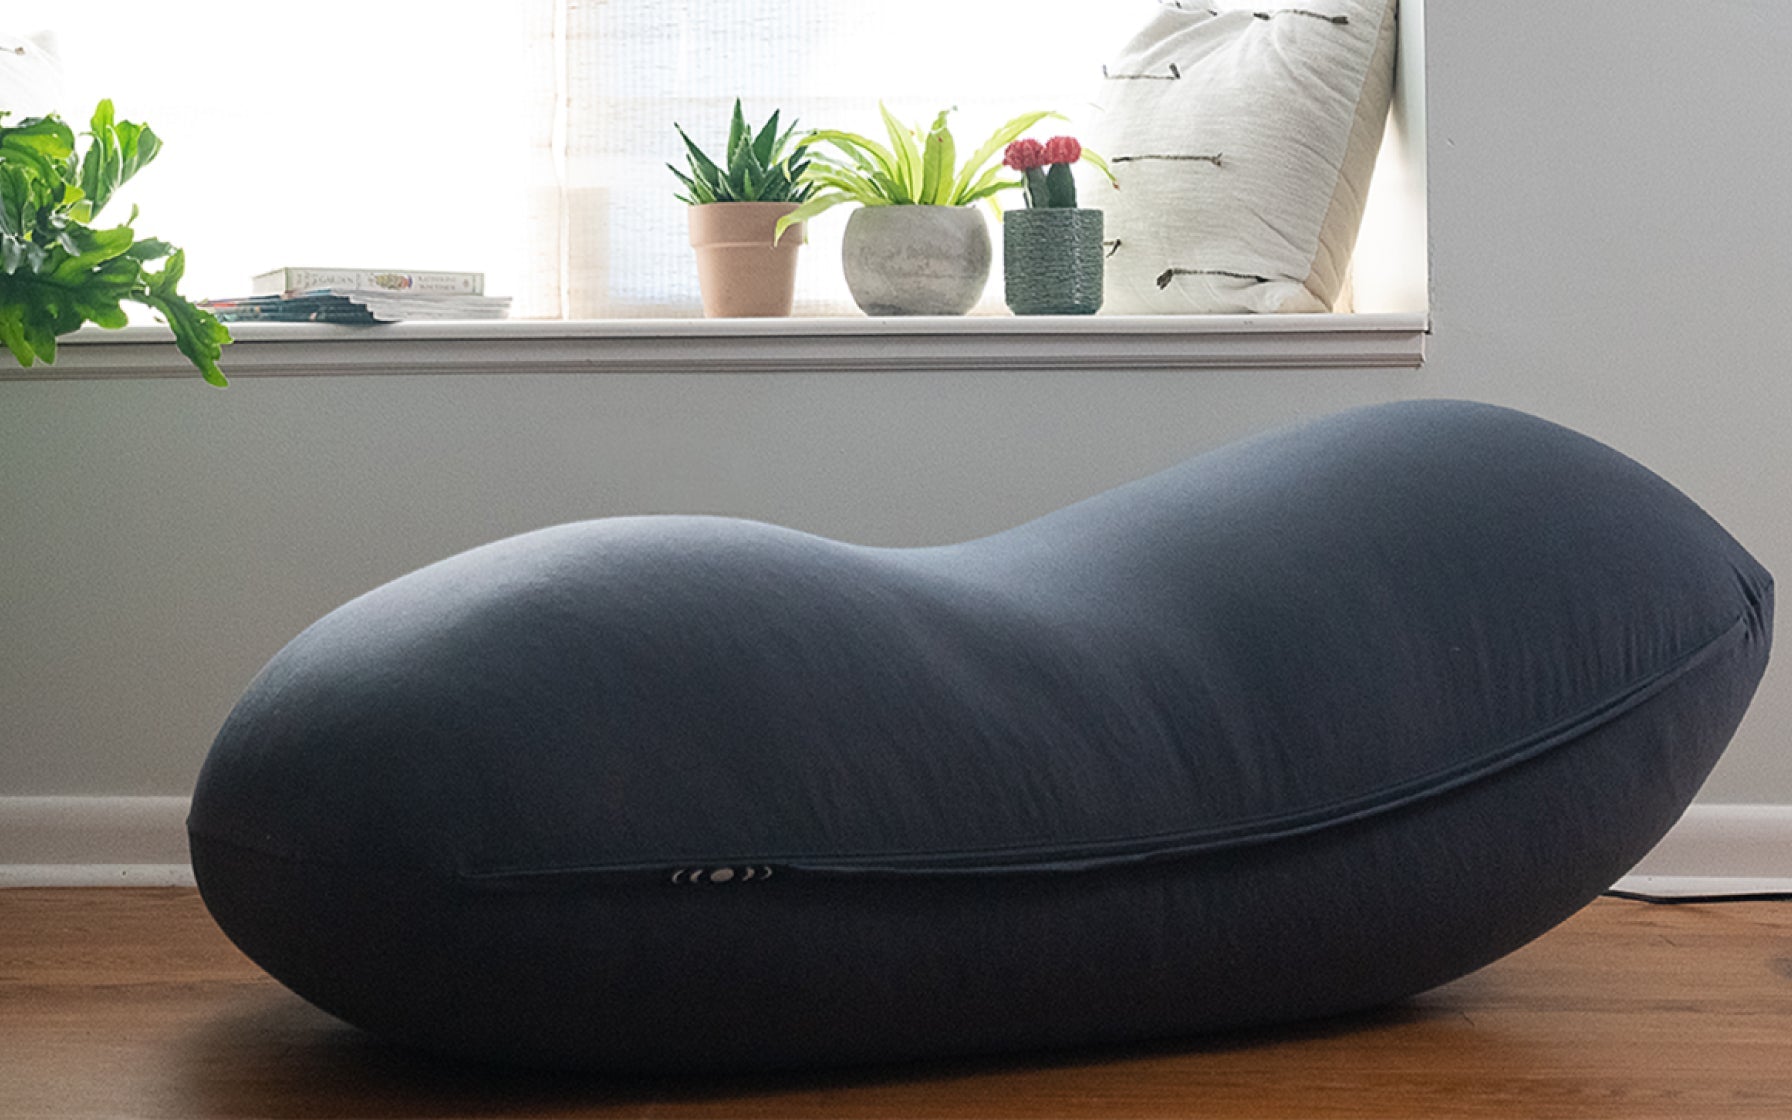 Lounger Beanbag Chairs, Anxiety and Stress Reducers